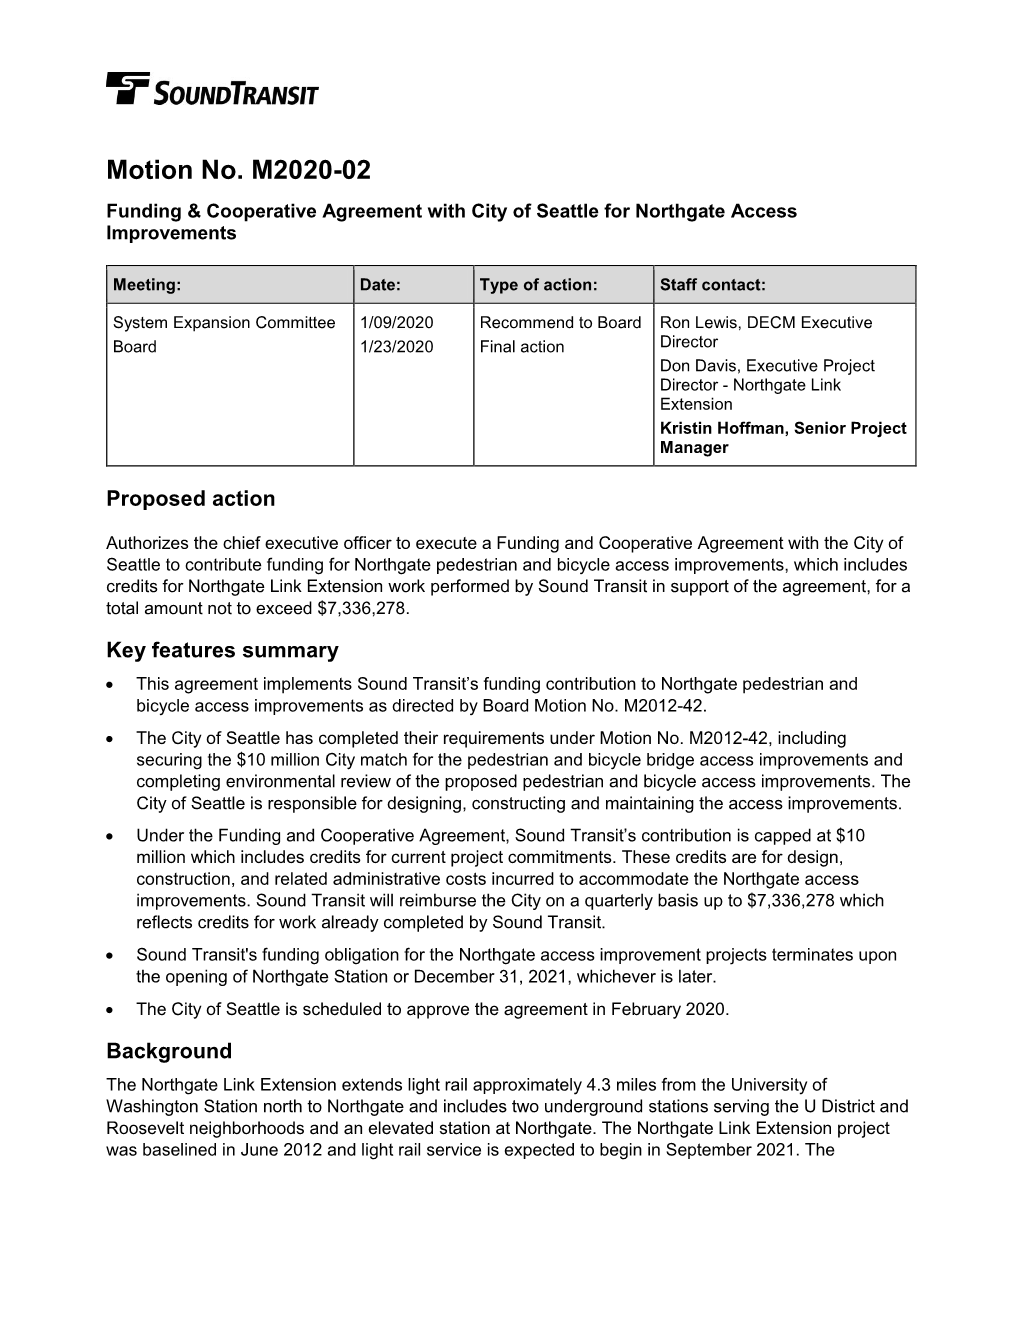 Motion No. M2020-02 Funding & Cooperative Agreement with City of Seattle for Northgate Access Improvements